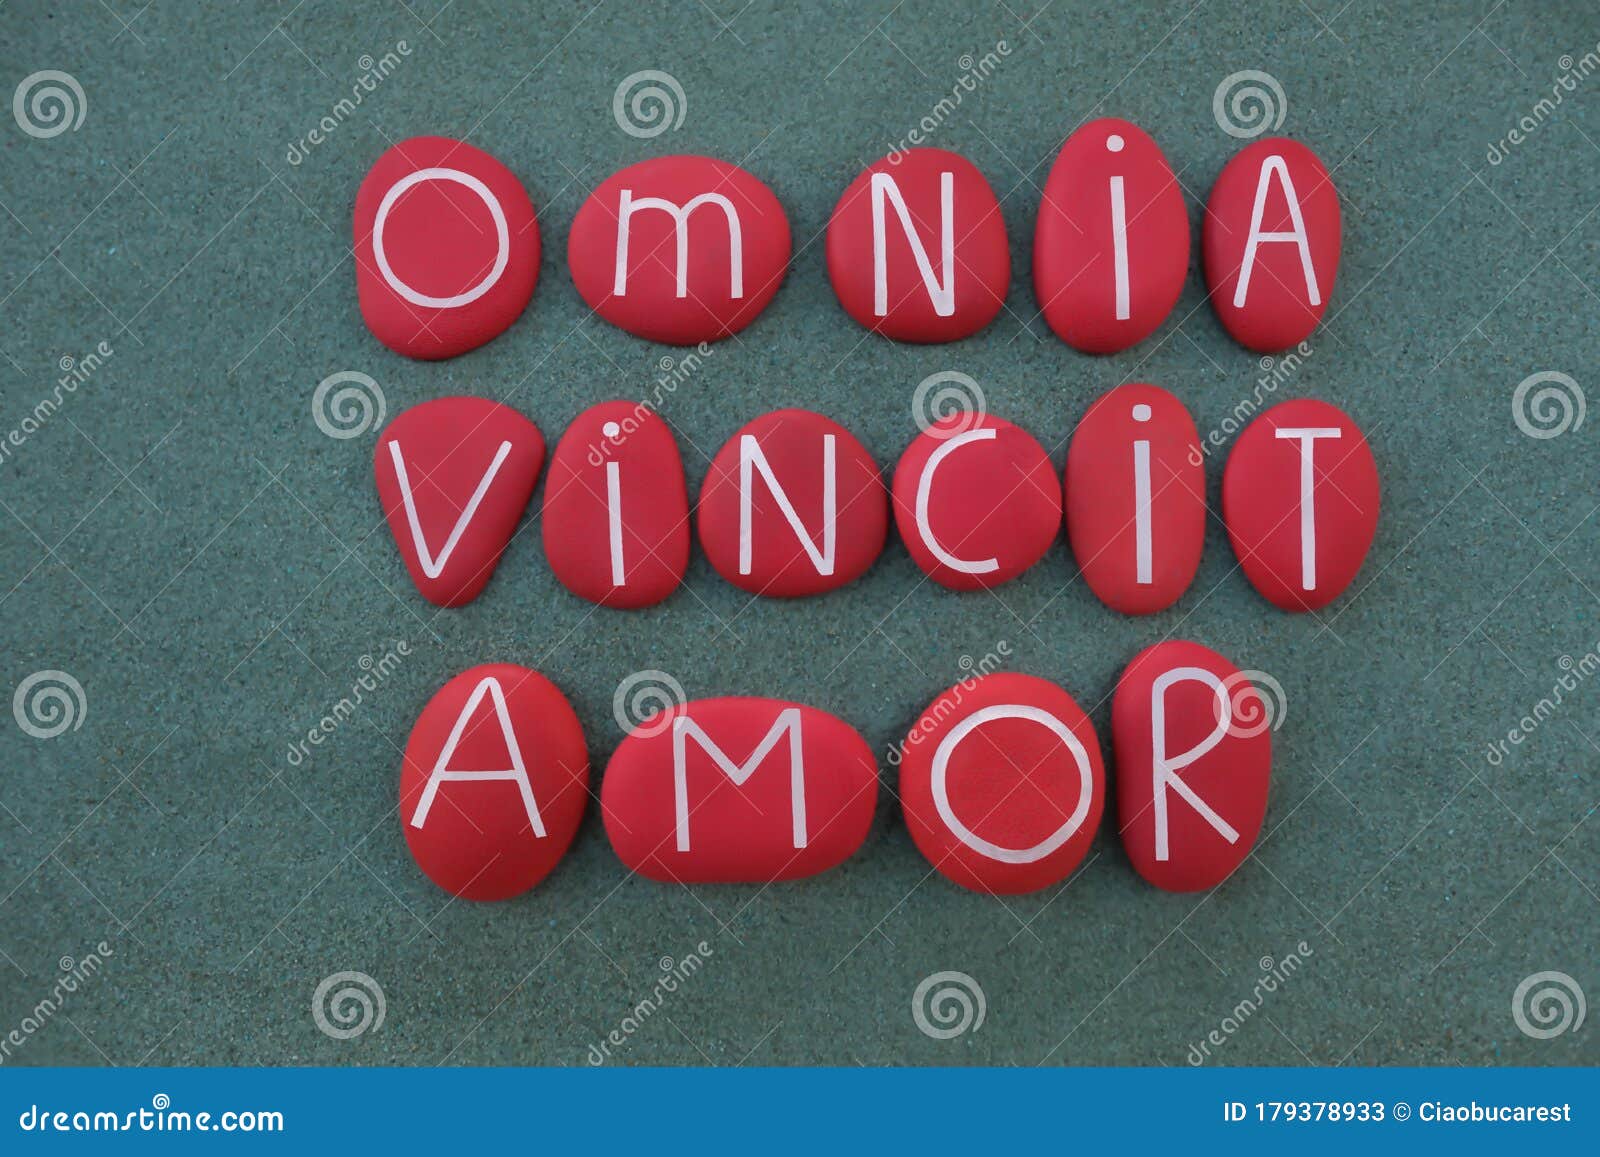 omnia vincit amor, love conquers all, latin phrase, virgil poet, text composed with red colored stone letters over green sand